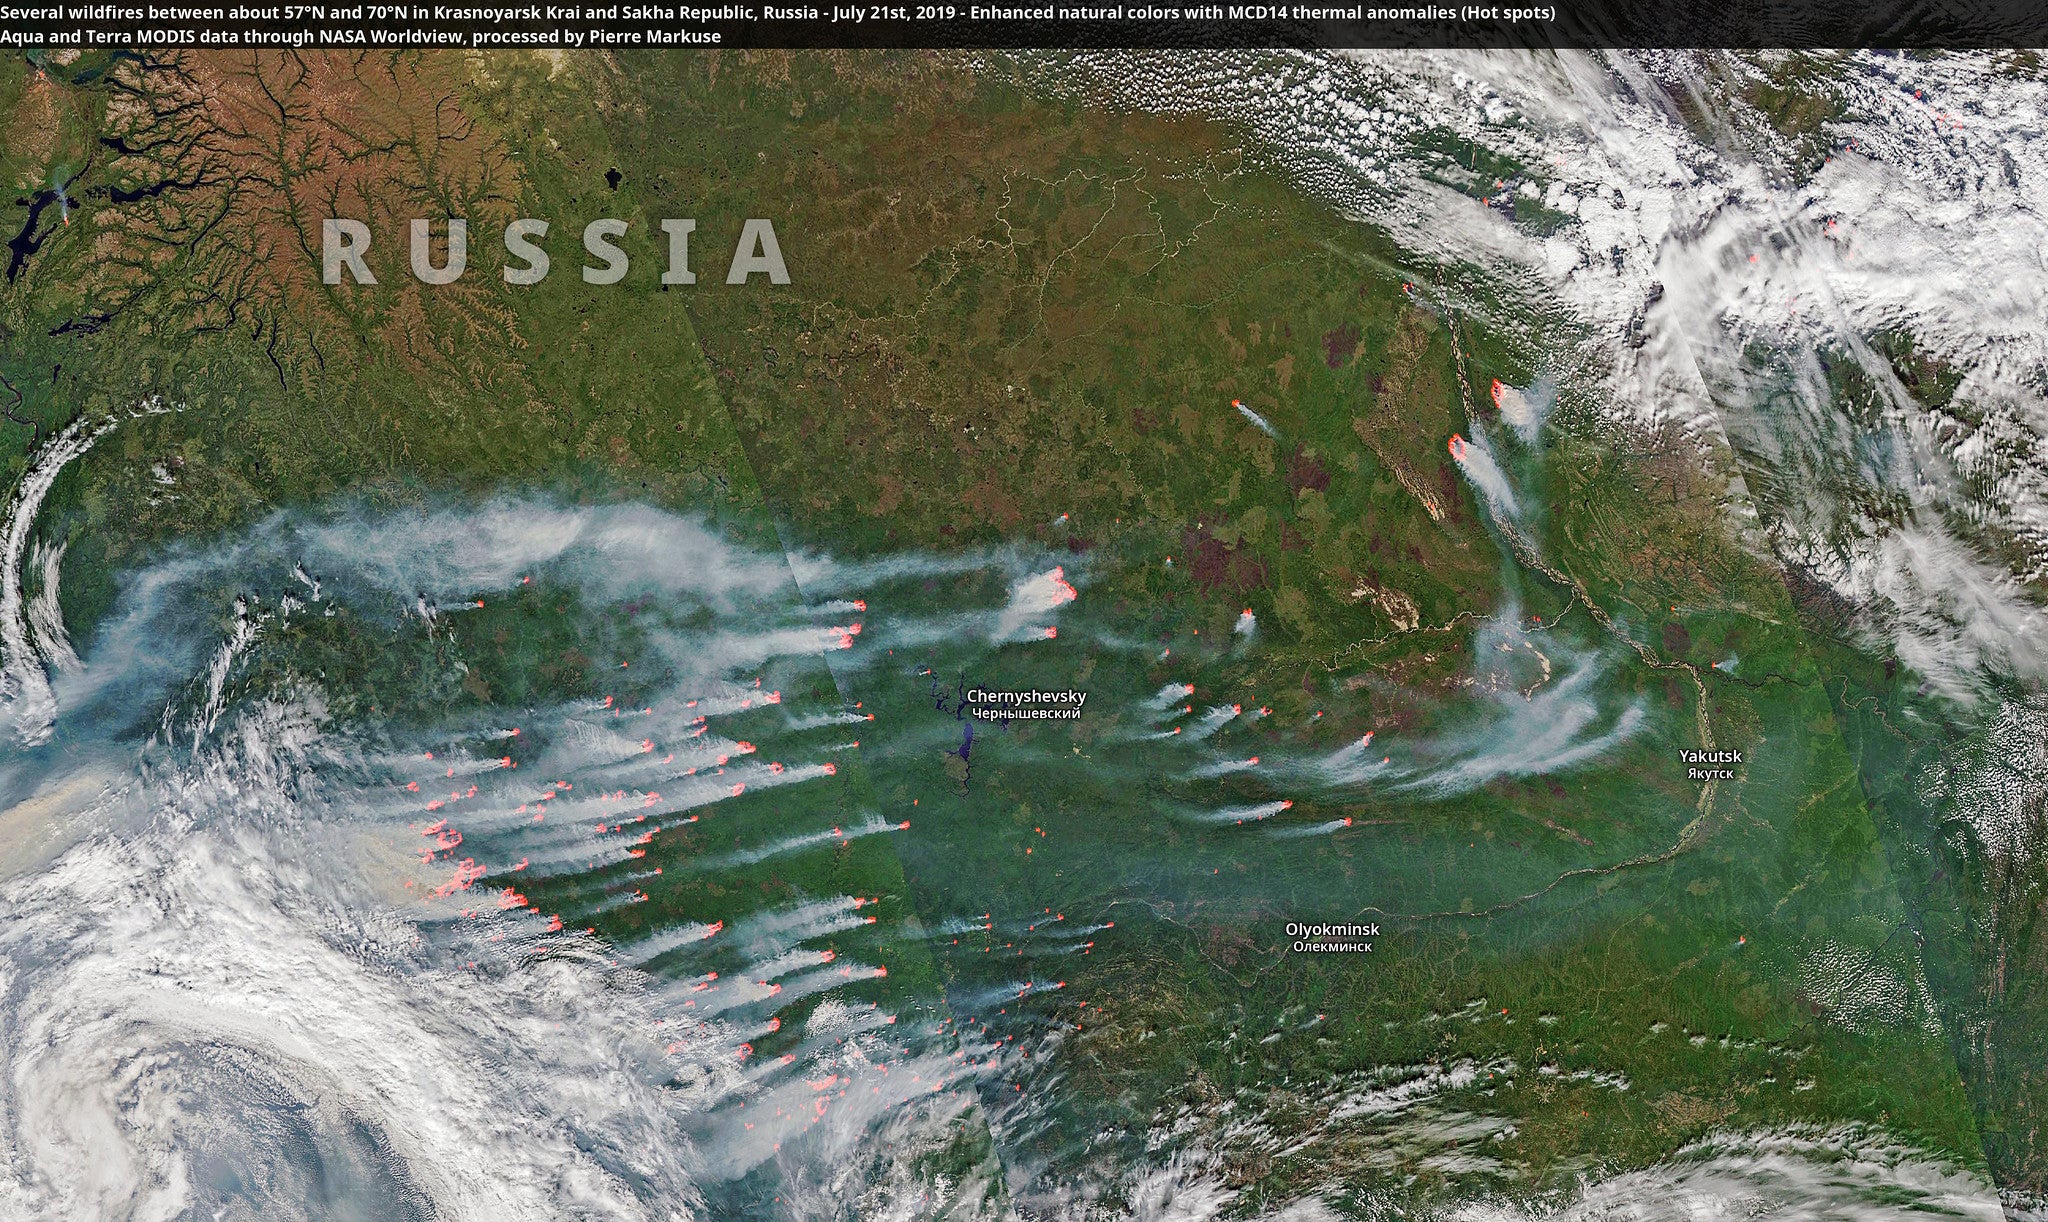 Satellite image processed by Pierre Markuse showing numerous wildfires burning in Russia just south of the Arctic Circle